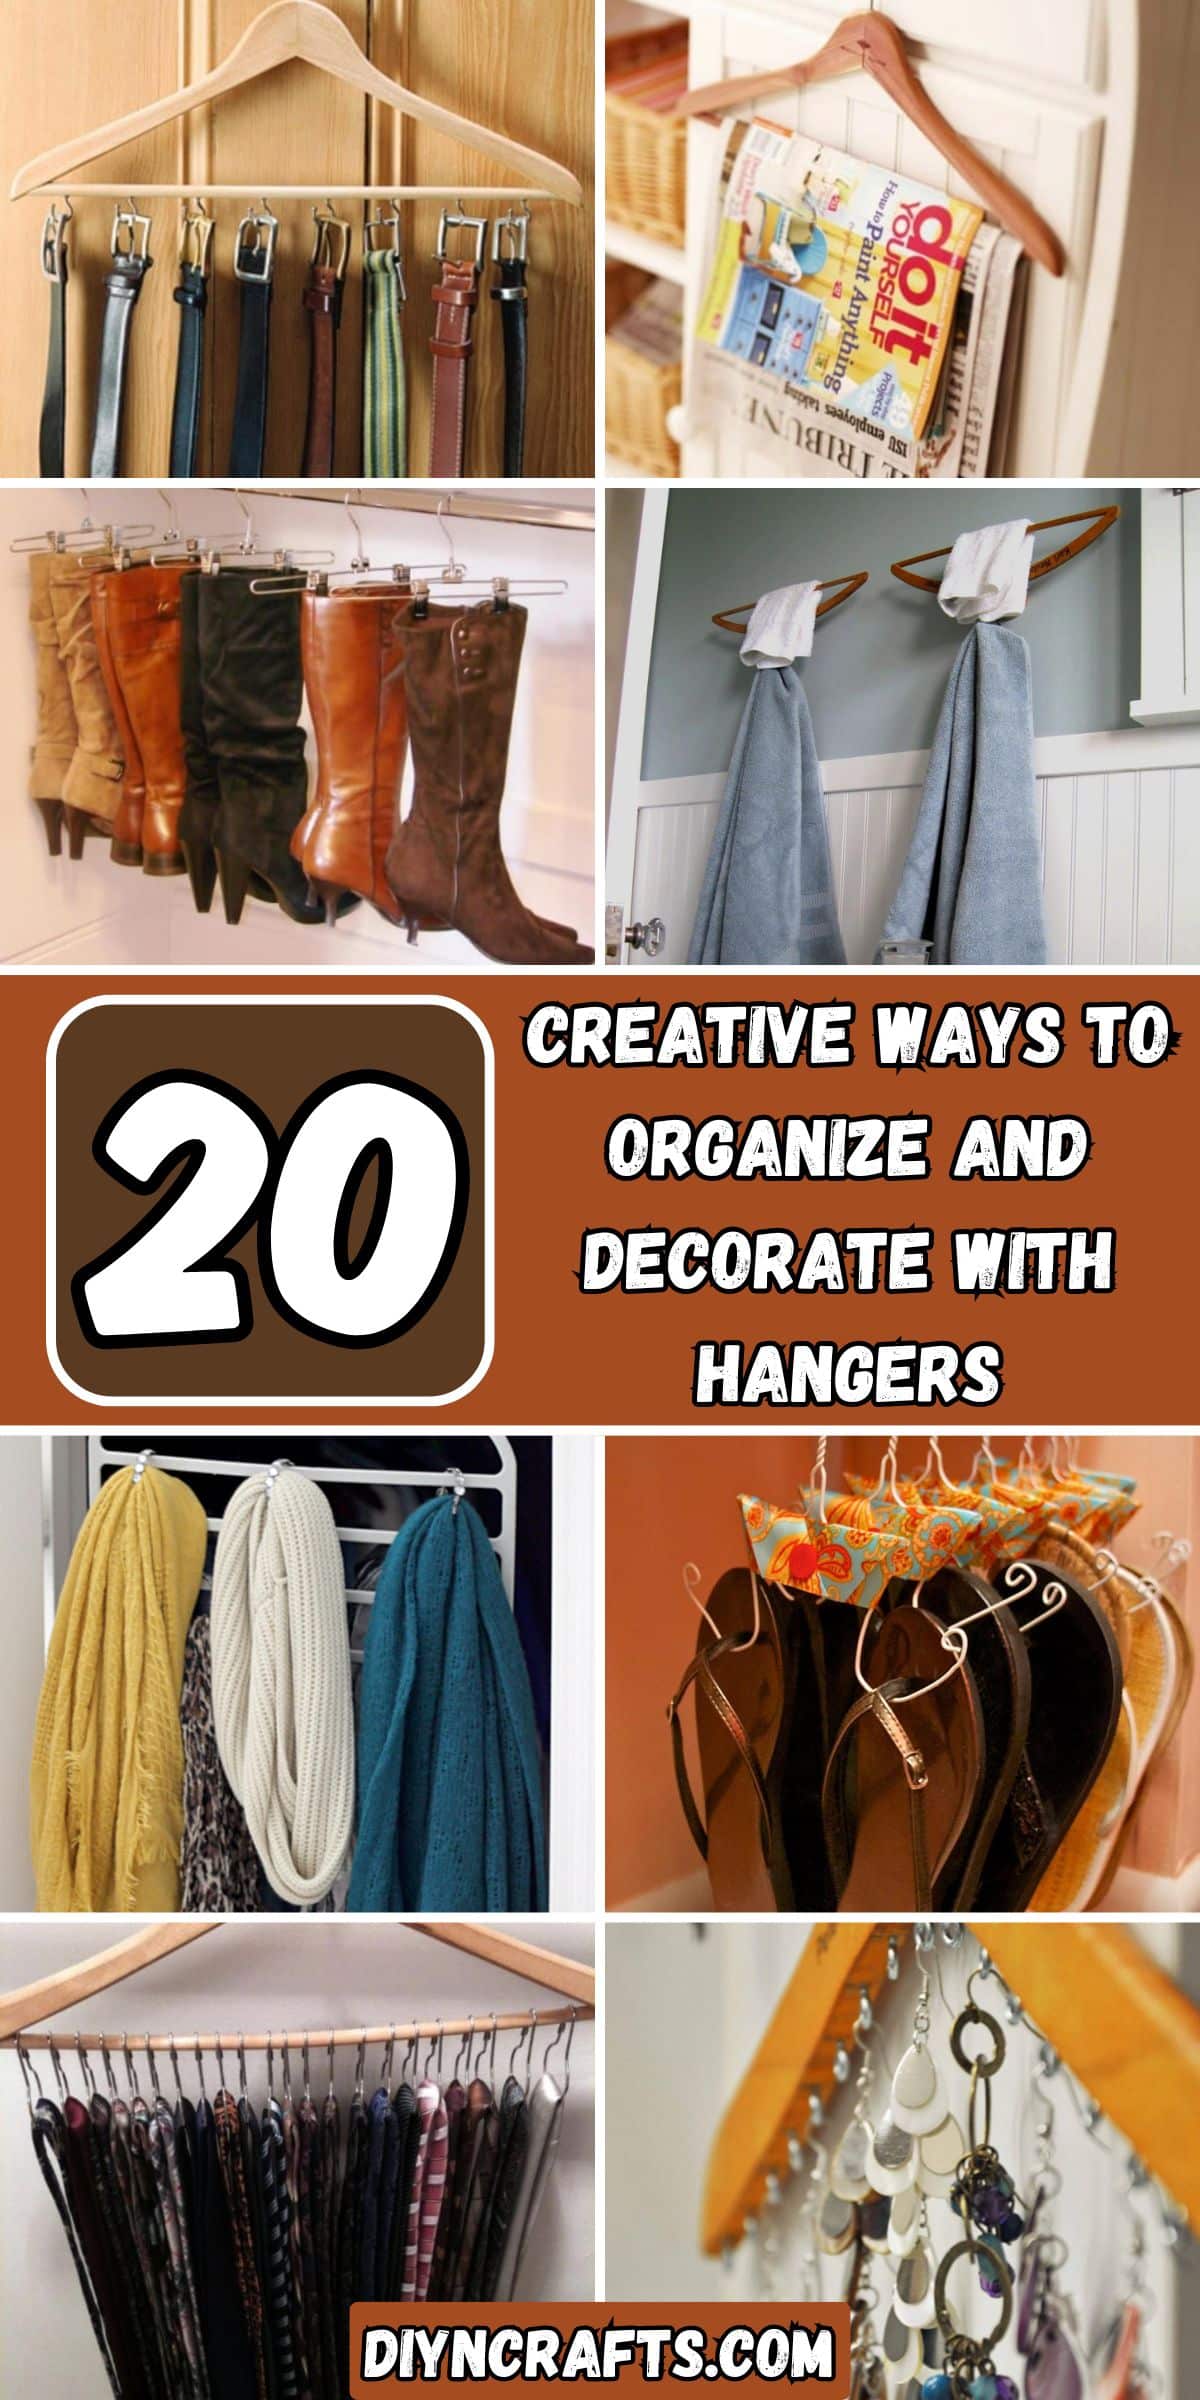 20 Creative Ways to Organize and Decorate with Hangers collage.